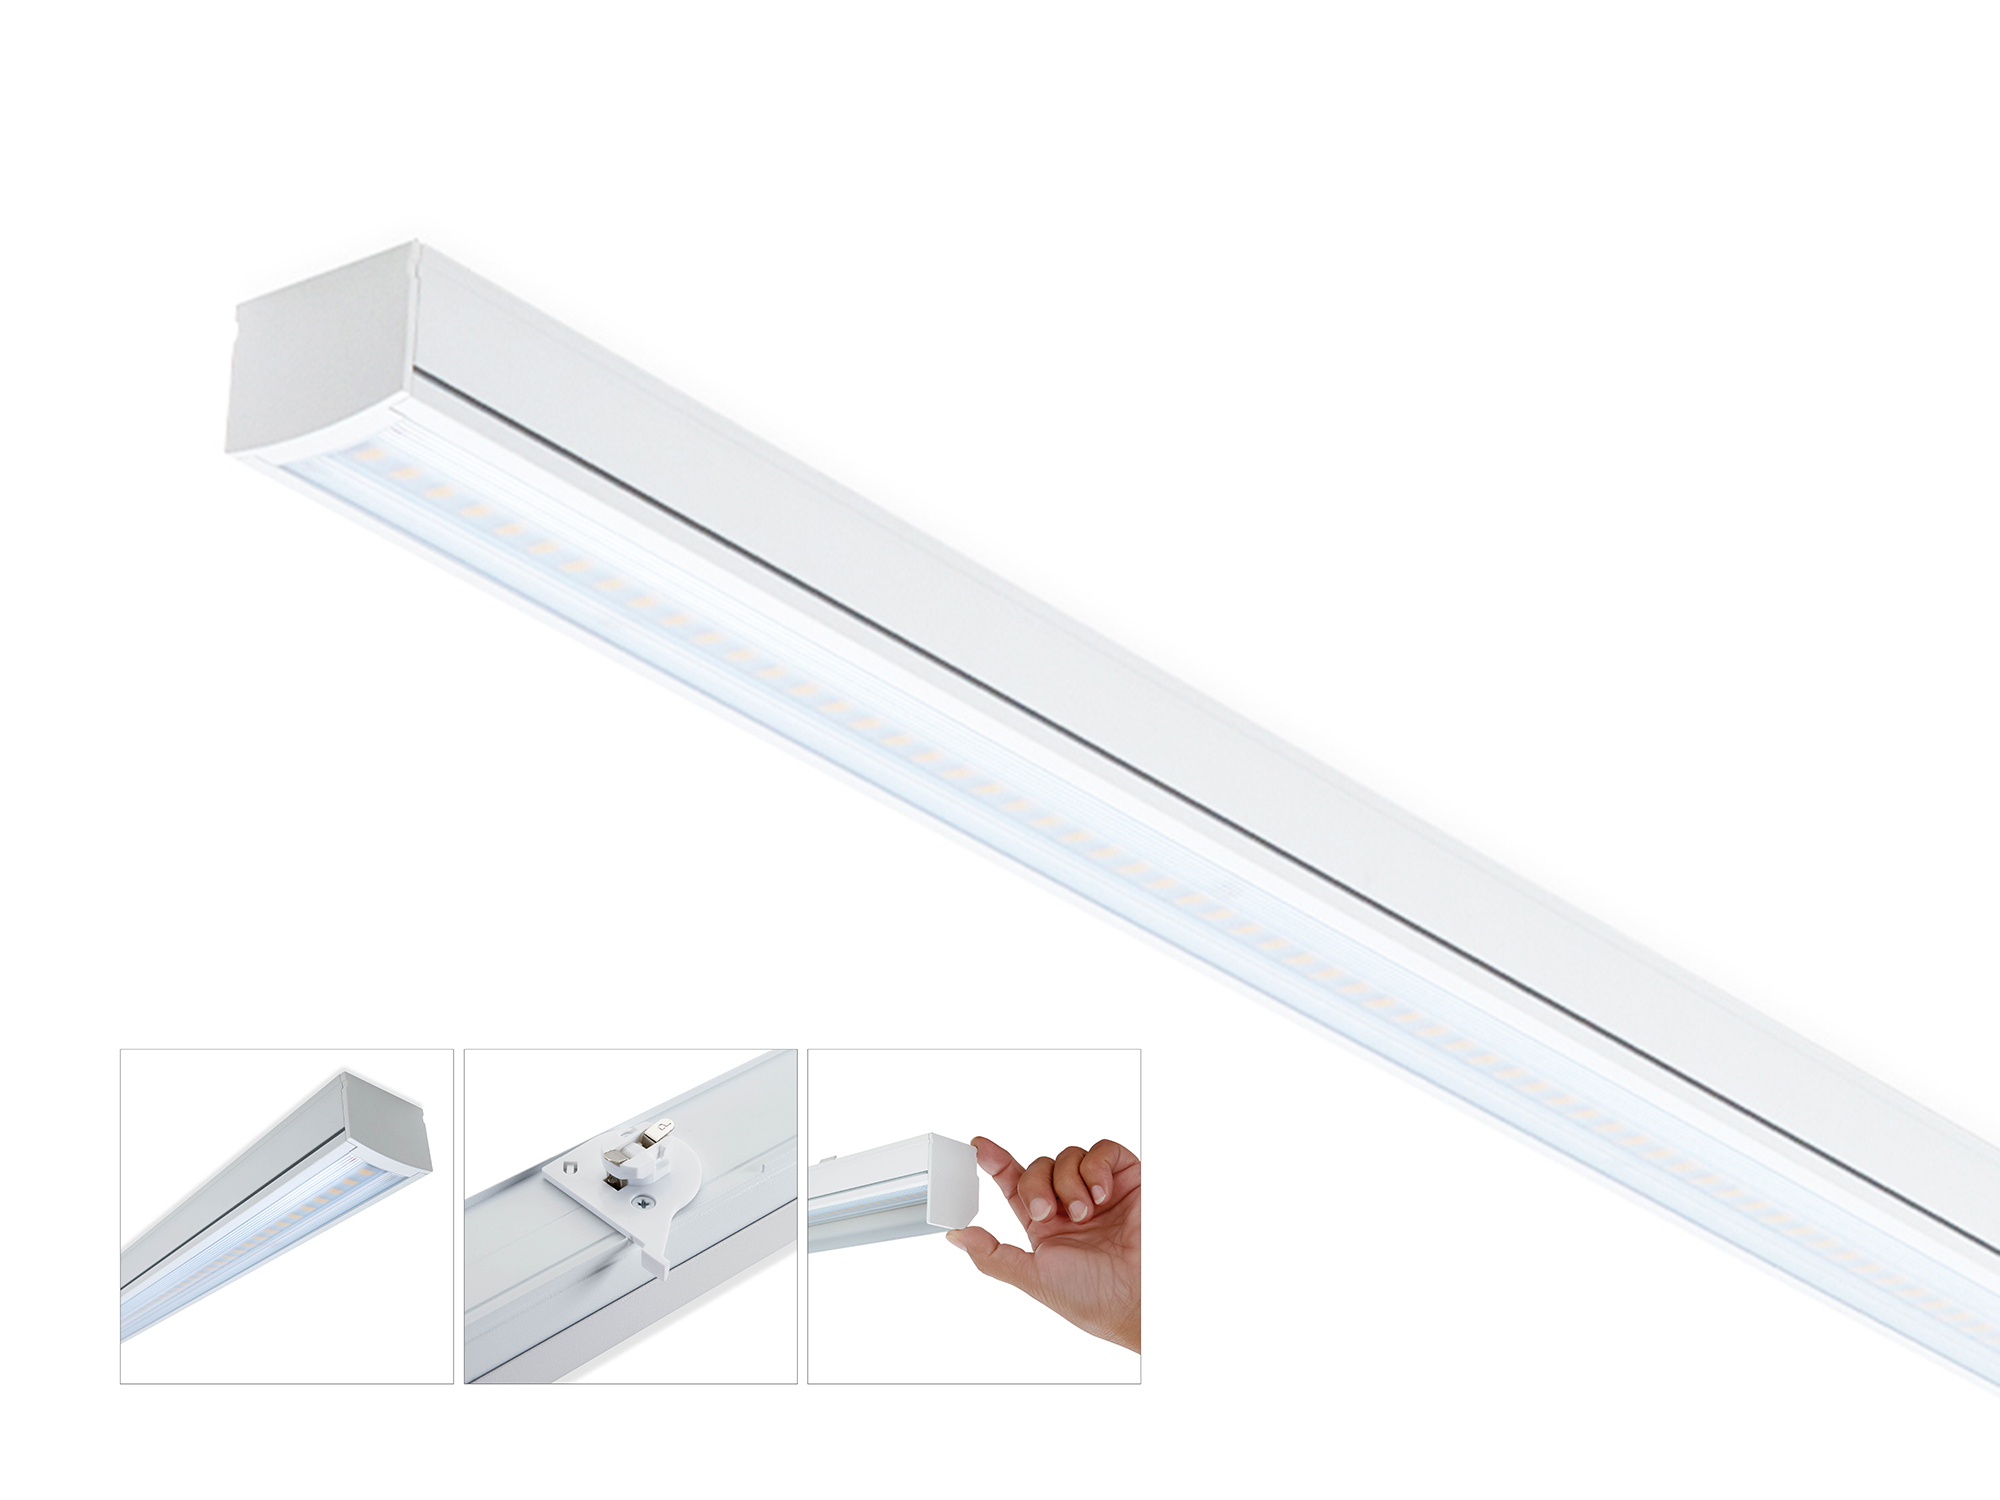 480 Retailer, a linear track luminaire that  delivers an unprecedented lighting quality that makes merchandise pop, accurately depicting color with a 94 Color Rendering Index (CRI) and producing vivid reds with an R9 value of 90. 